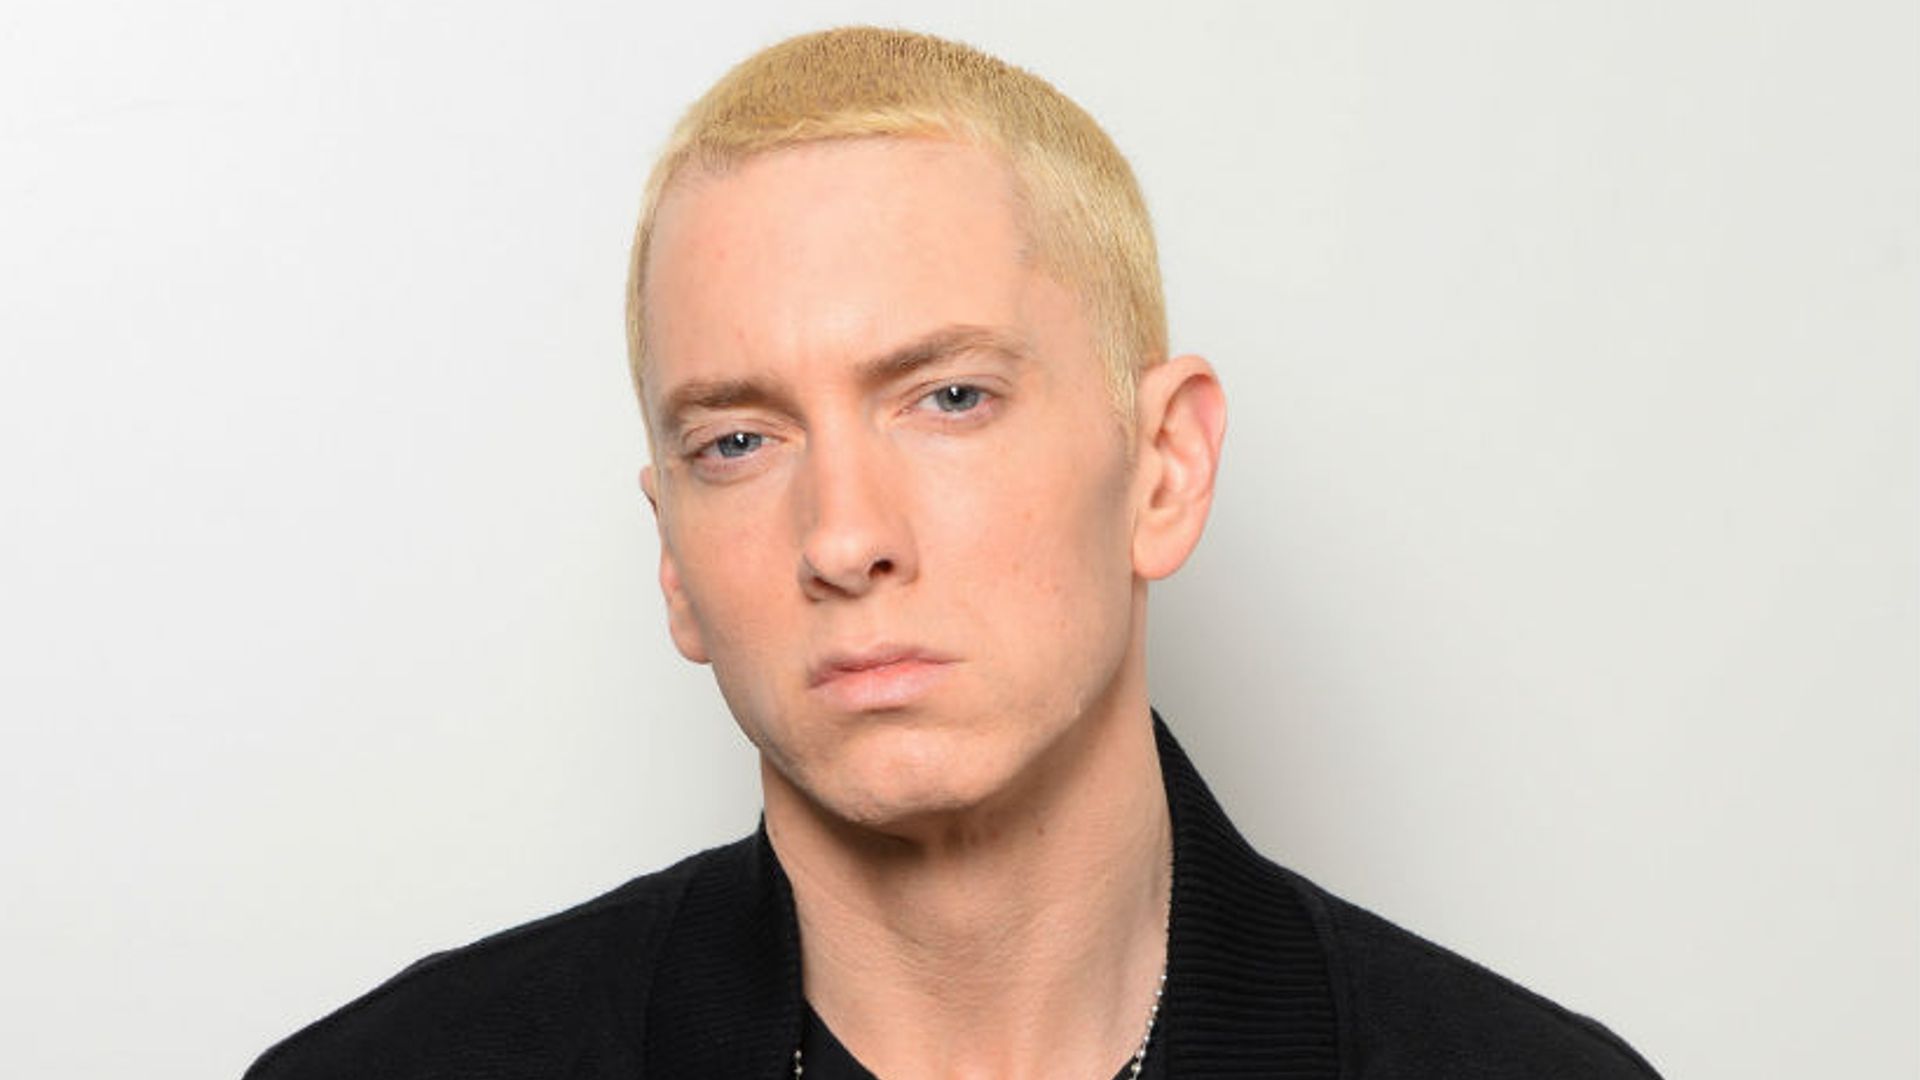 Eminem takes to Twitter to help raise nearly £2million for Manchester attack victims